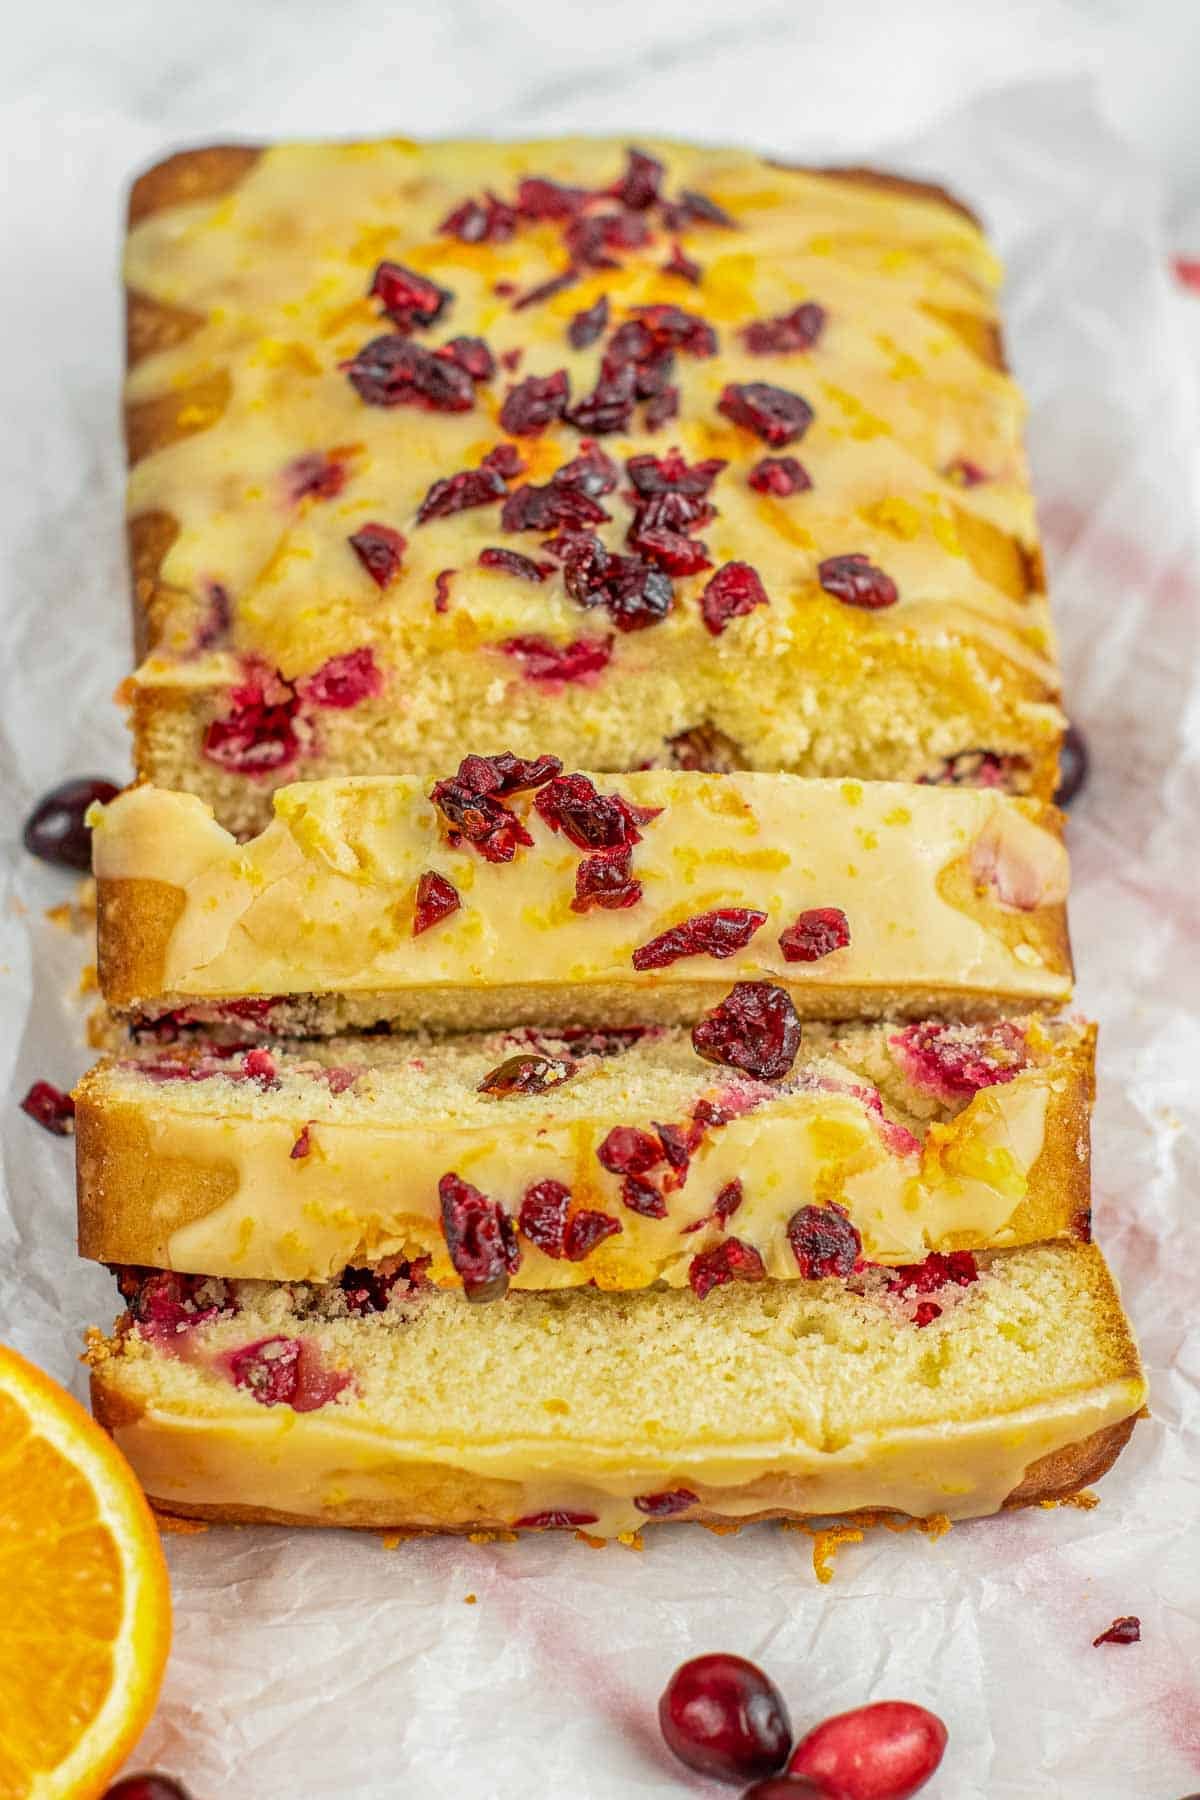 A loaf of cranberry orange bread topped with orang glaze and diced chopped cranberries with three slices cut.